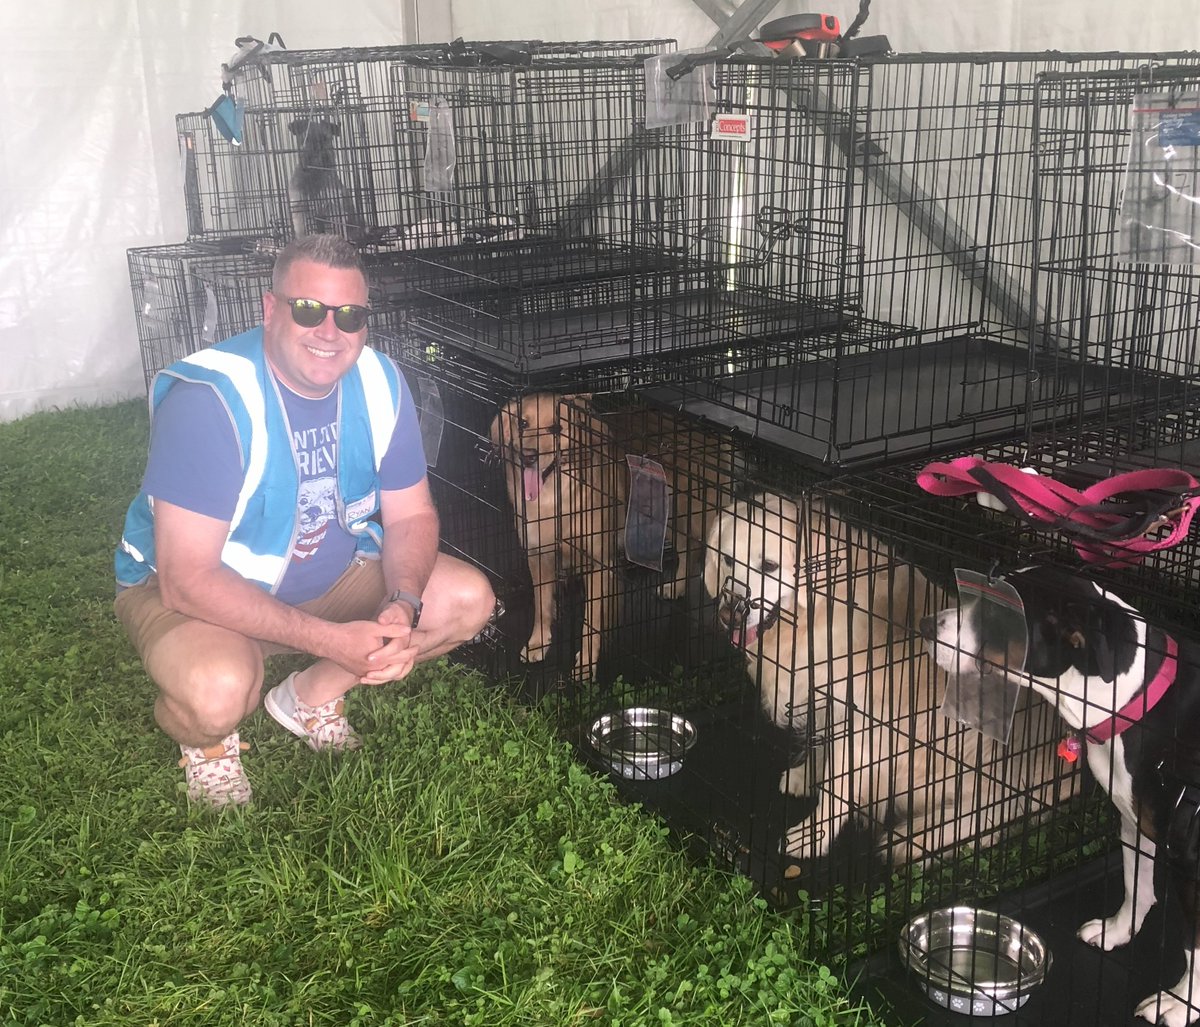 We had a great time volunteering last week with the Lexington Humane Society during the Three-Day Event at the Kentucky Horse Park–dog walking, doggie day care, and merchandise tent. The only thing better is that Goose (in the green bandana) found his fur-ever home! #serveothers